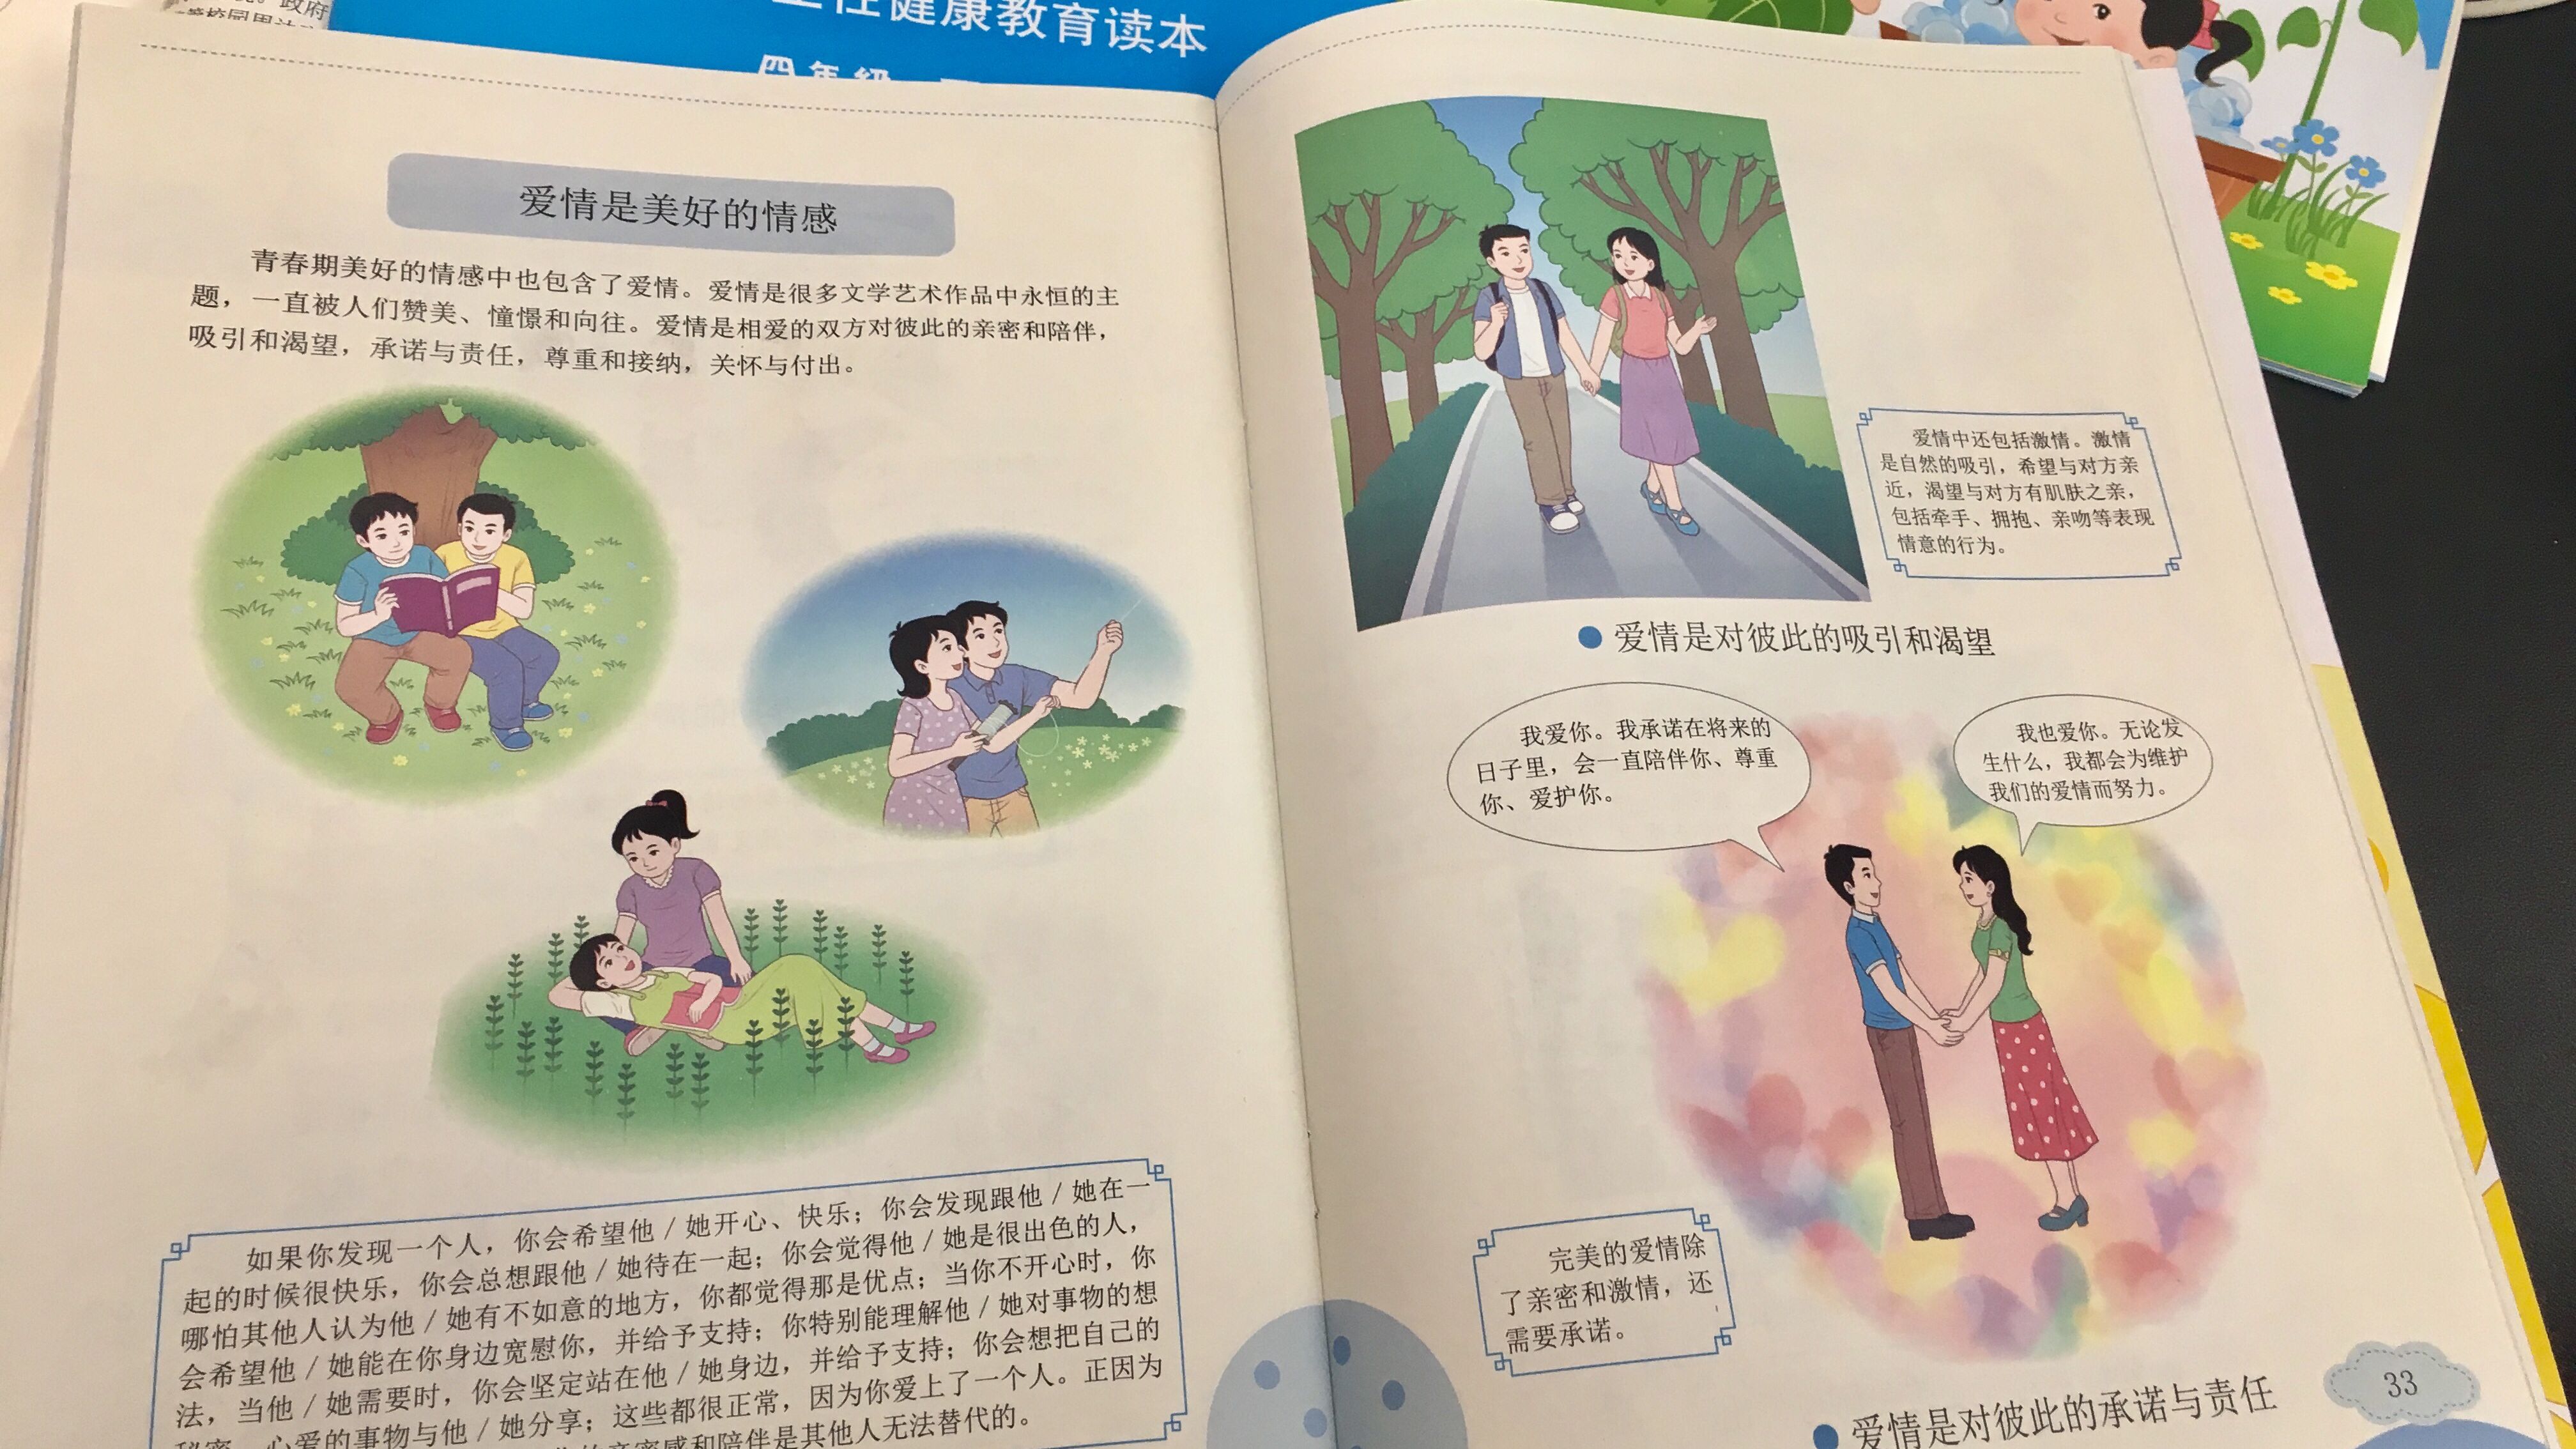 Shock and praise for groundbreaking sex-ed textbook in China | CNN